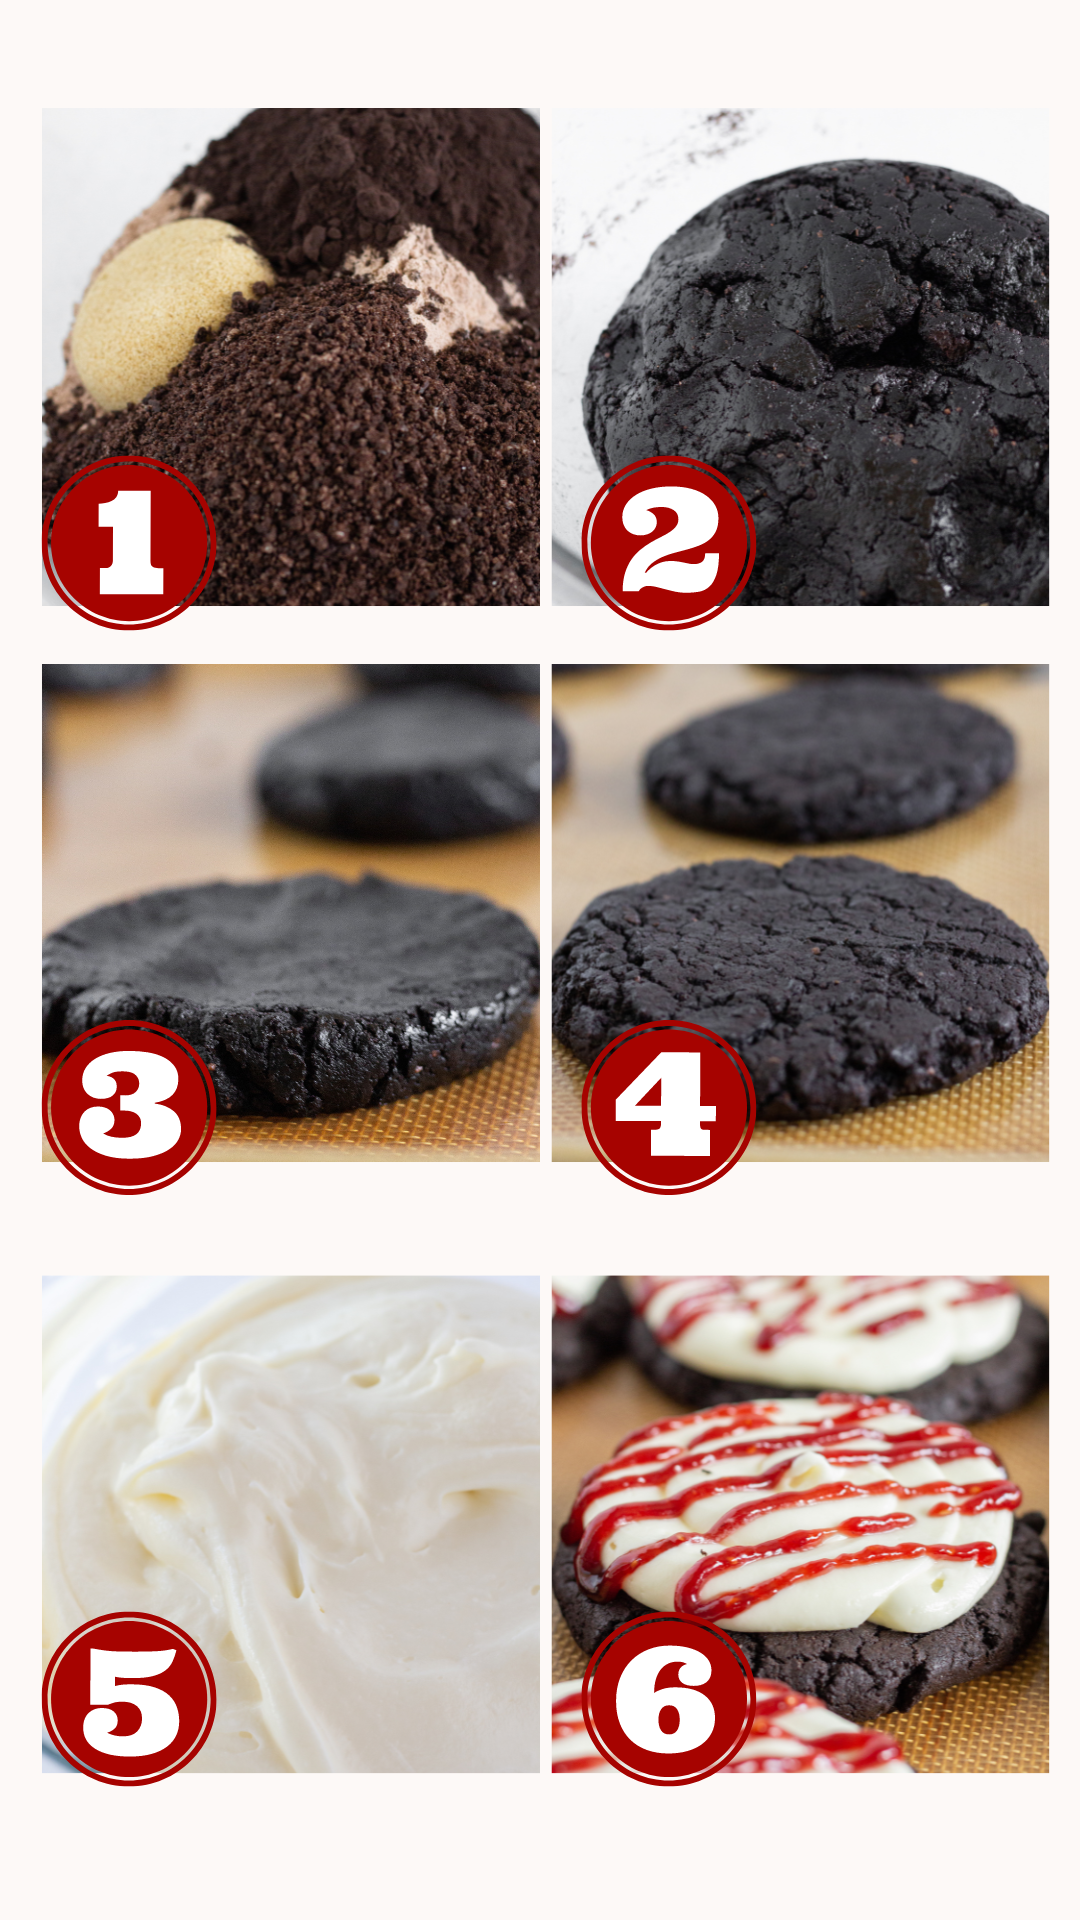 Steps for making Easy Crumbl Copycat Oreo Raspberry Cheesecake Cookies, by Top US Cookie Blog Practically Homemade